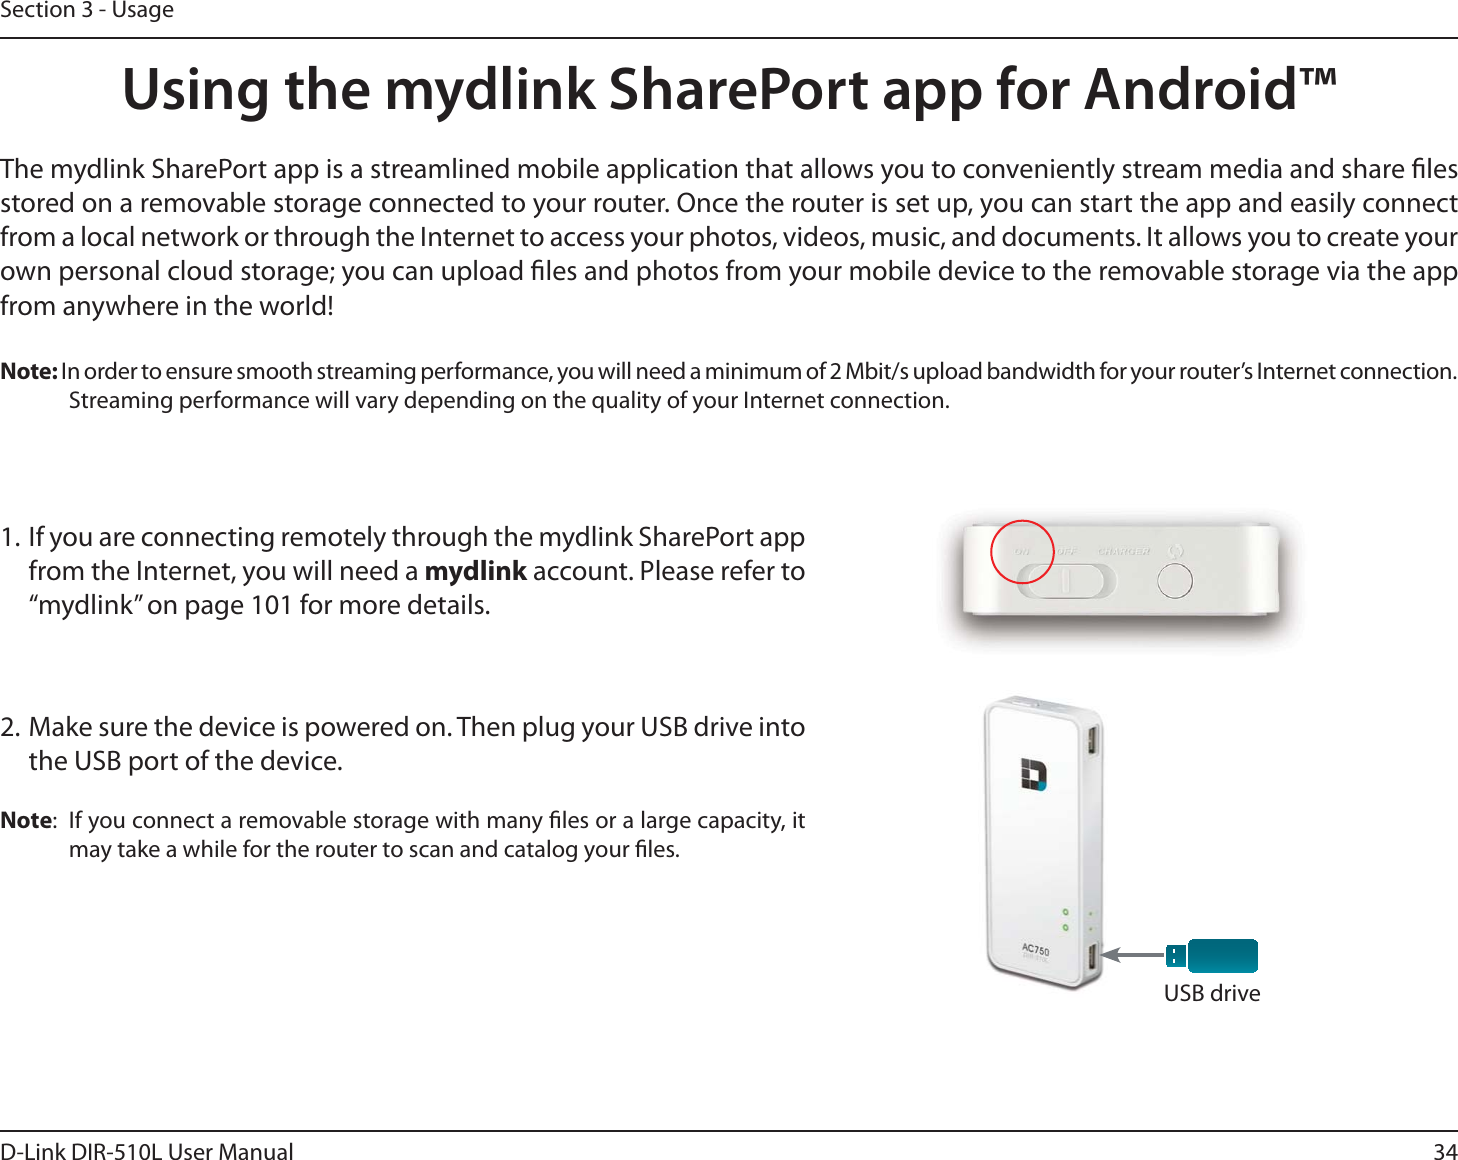 34D-Link DIR-510L User ManualSection 3 - UsageUsing the mydlink SharePort app for Android™The mydlink SharePort app is a streamlined mobile application that allows you to conveniently stream media and share les stored on a removable storage connected to your router. Once the router is set up, you can start the app and easily connect from a local network or through the Internet to access your photos, videos, music, and documents. It allows you to create your own personal cloud storage; you can upload les and photos from your mobile device to the removable storage via the app from anywhere in the world!Note: In order to ensure smooth streaming performance, you will need a minimum of 2 Mbit/s upload bandwidth for your router’s Internet connection. Streaming performance will vary depending on the quality of your Internet connection.1. If you are connecting remotely through the mydlink SharePort app from the Internet, you will need a mydlink account. Please refer to  “mydlink” on page 101 for more details.2. Make sure the device is powered on. Then plug your USB drive into the USB port of the device.Note:  If you connect a removable storage with many les or a large capacity, it may take a while for the router to scan and catalog your les.USB drive